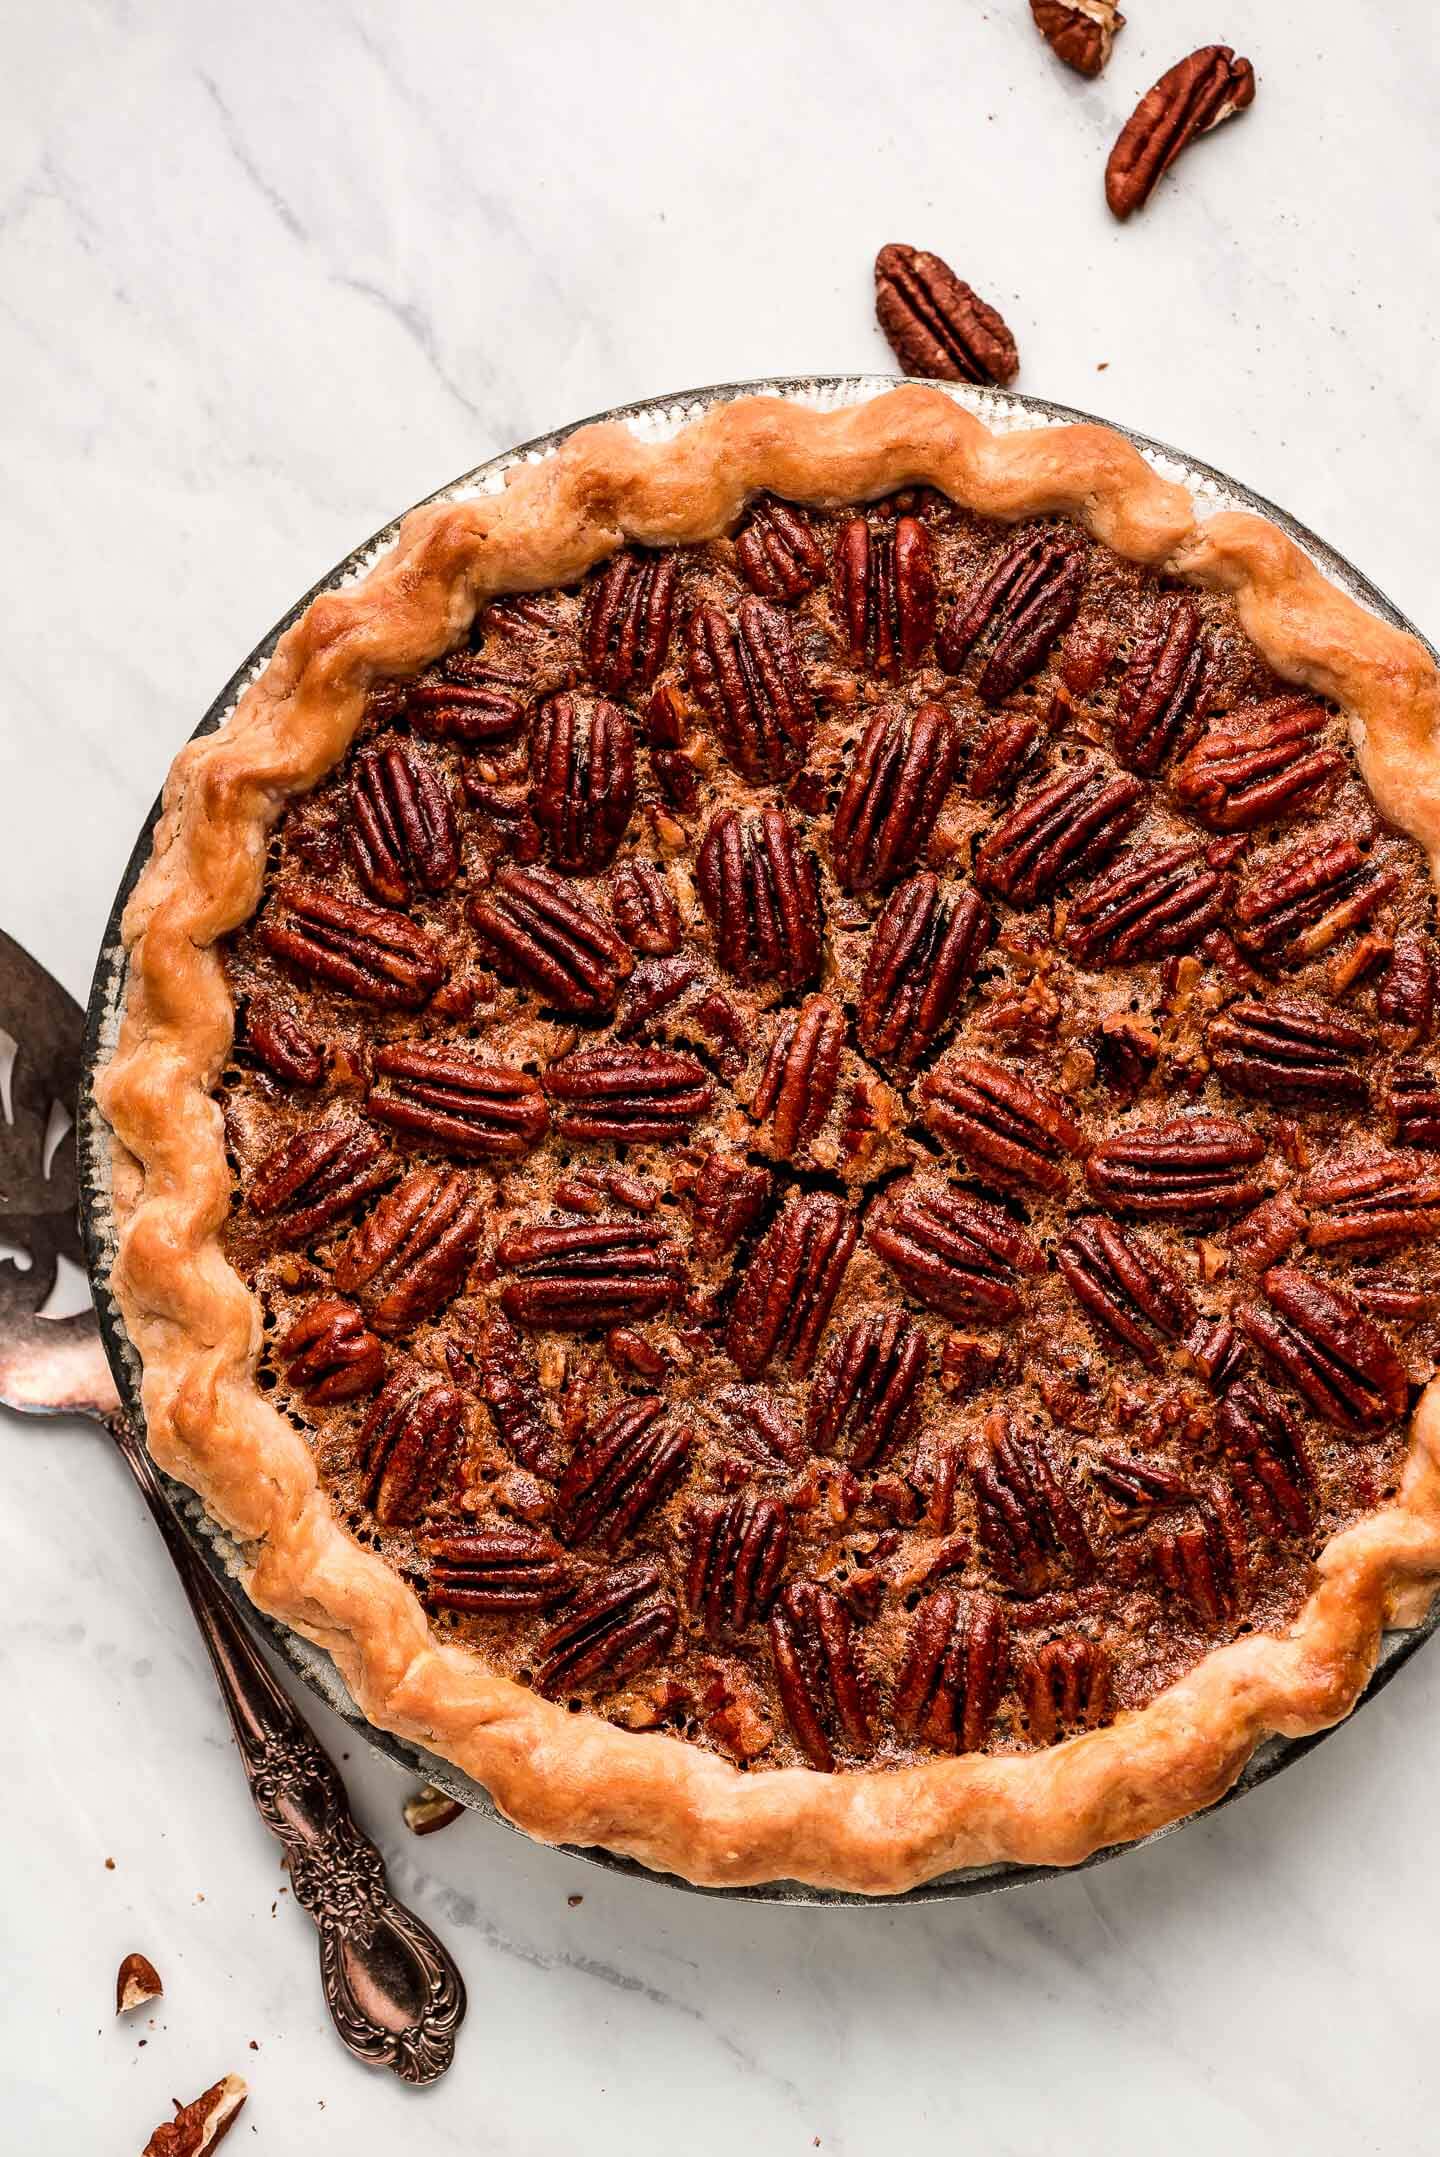 Top view of a whole pecan pie.